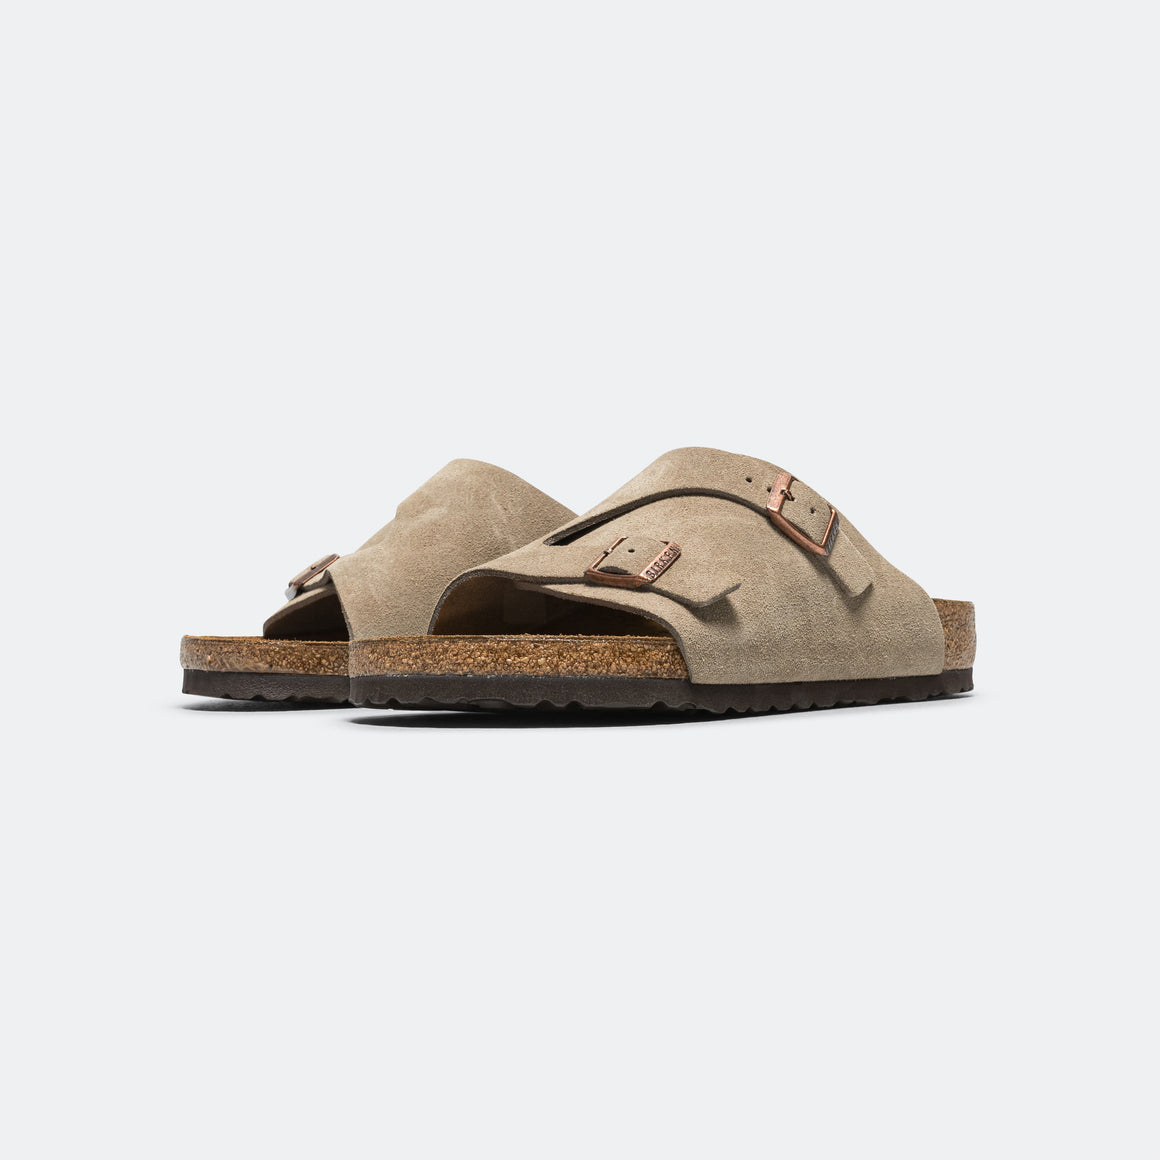 Birkenstock - Zurich - Taupe Suede Leather - UP THERE